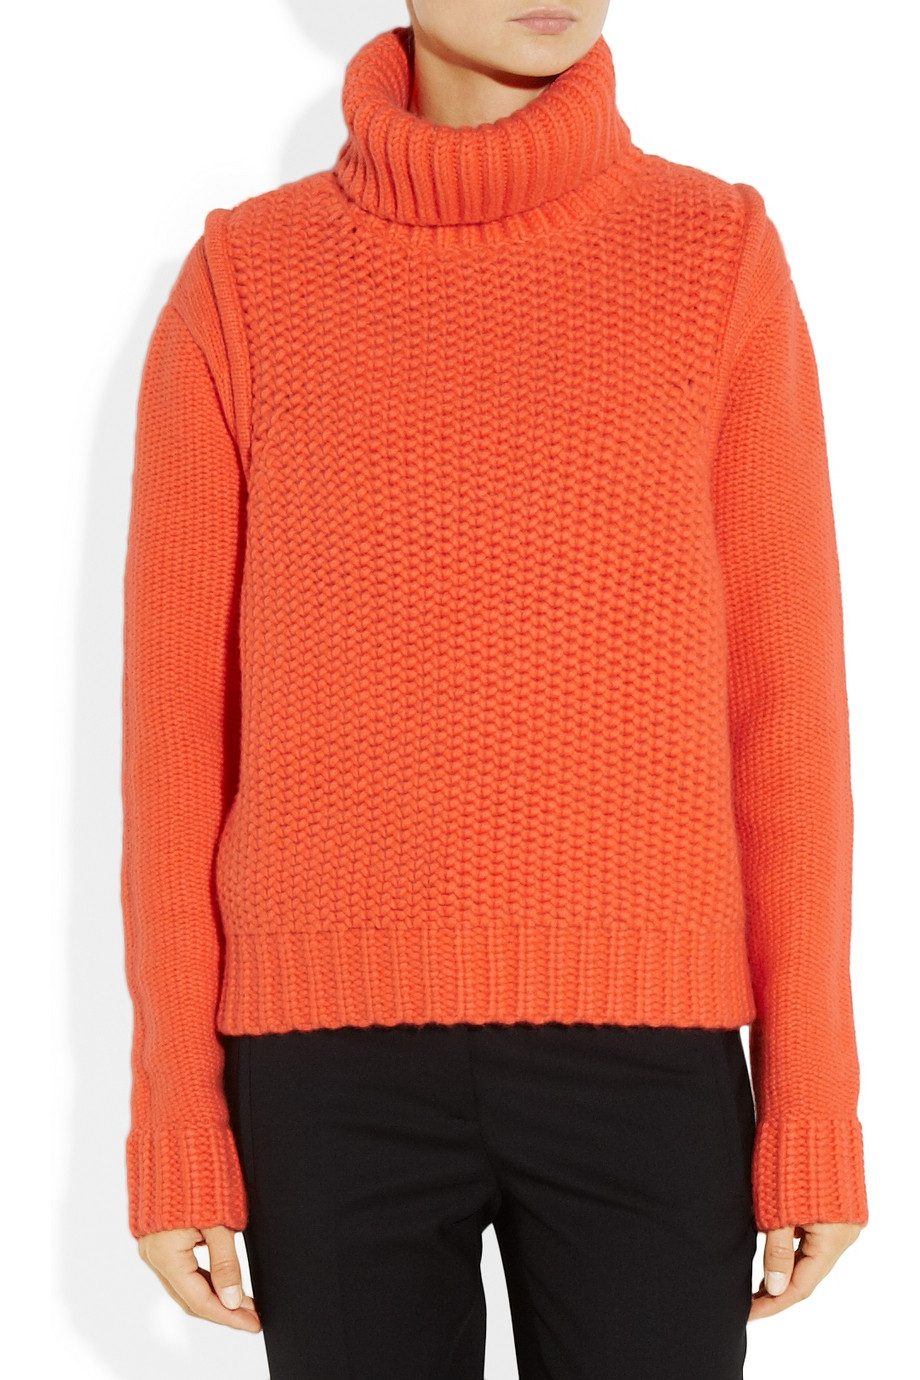 Proenza schouler Chunkyknit Cashmere Turtleneck Sweater in ...